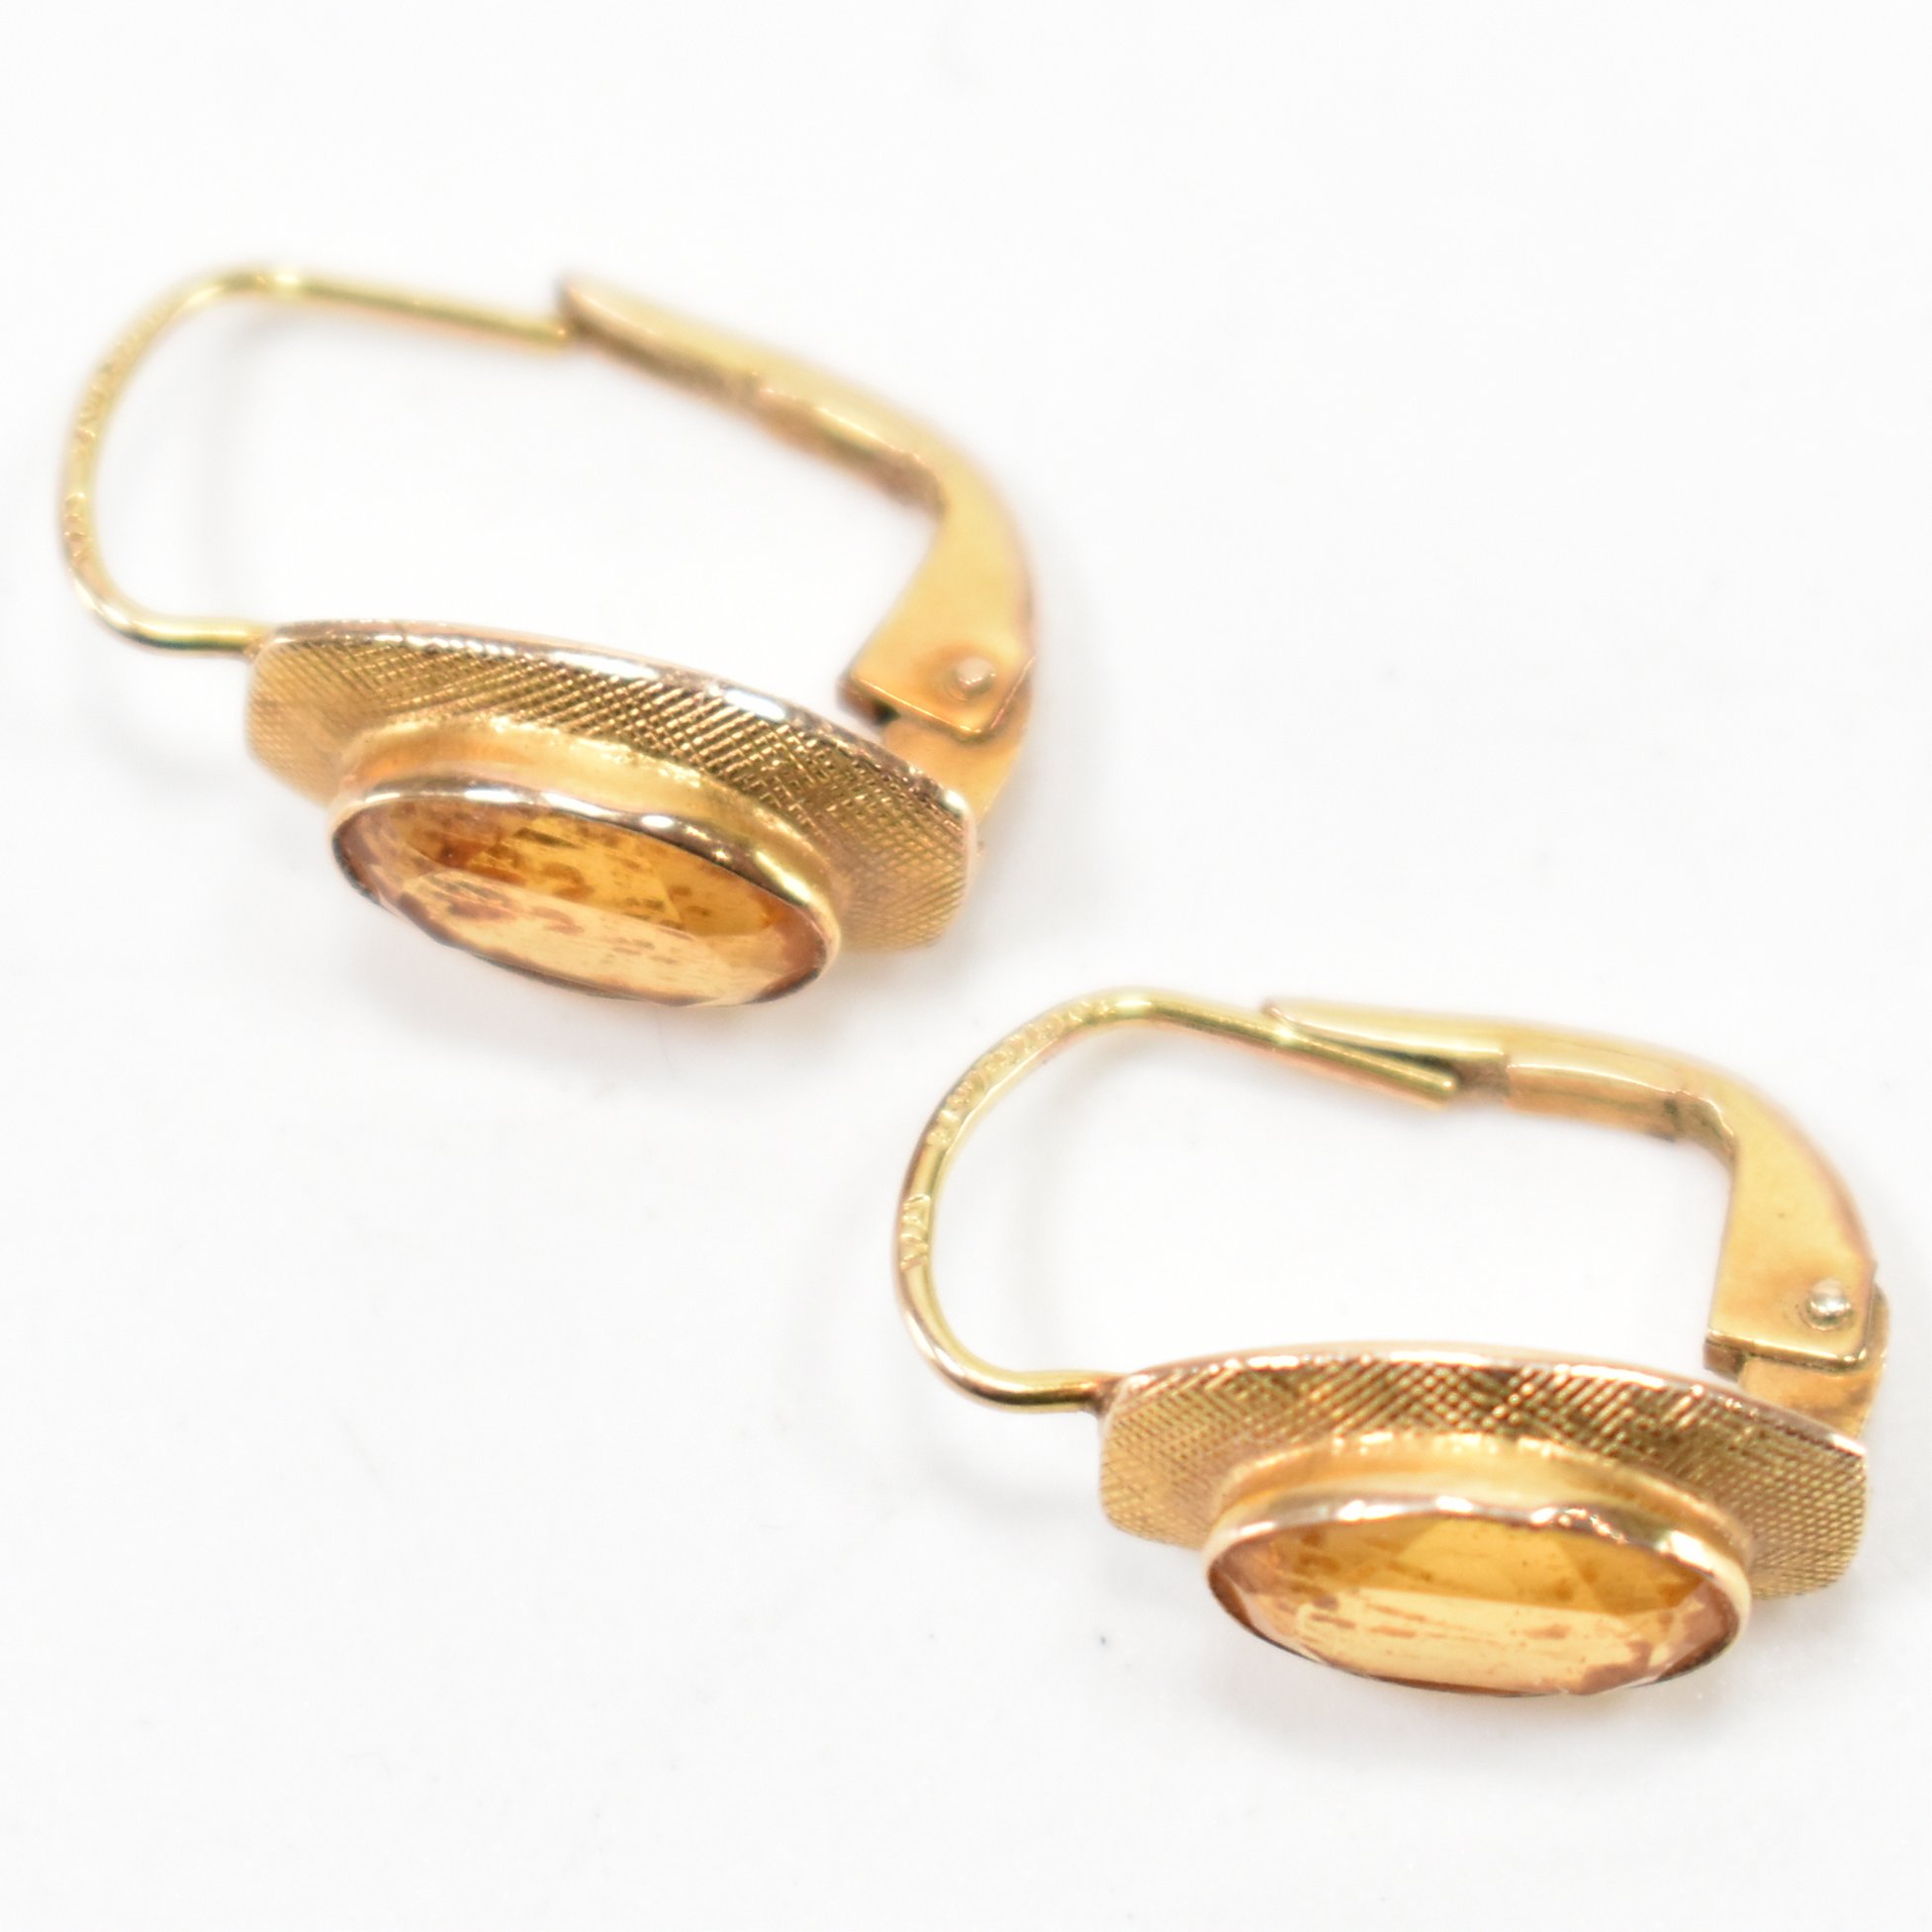 PAIR OF HALLMARKED 9CT GOLD & CITRINE DROP EARRINGS - Image 4 of 5